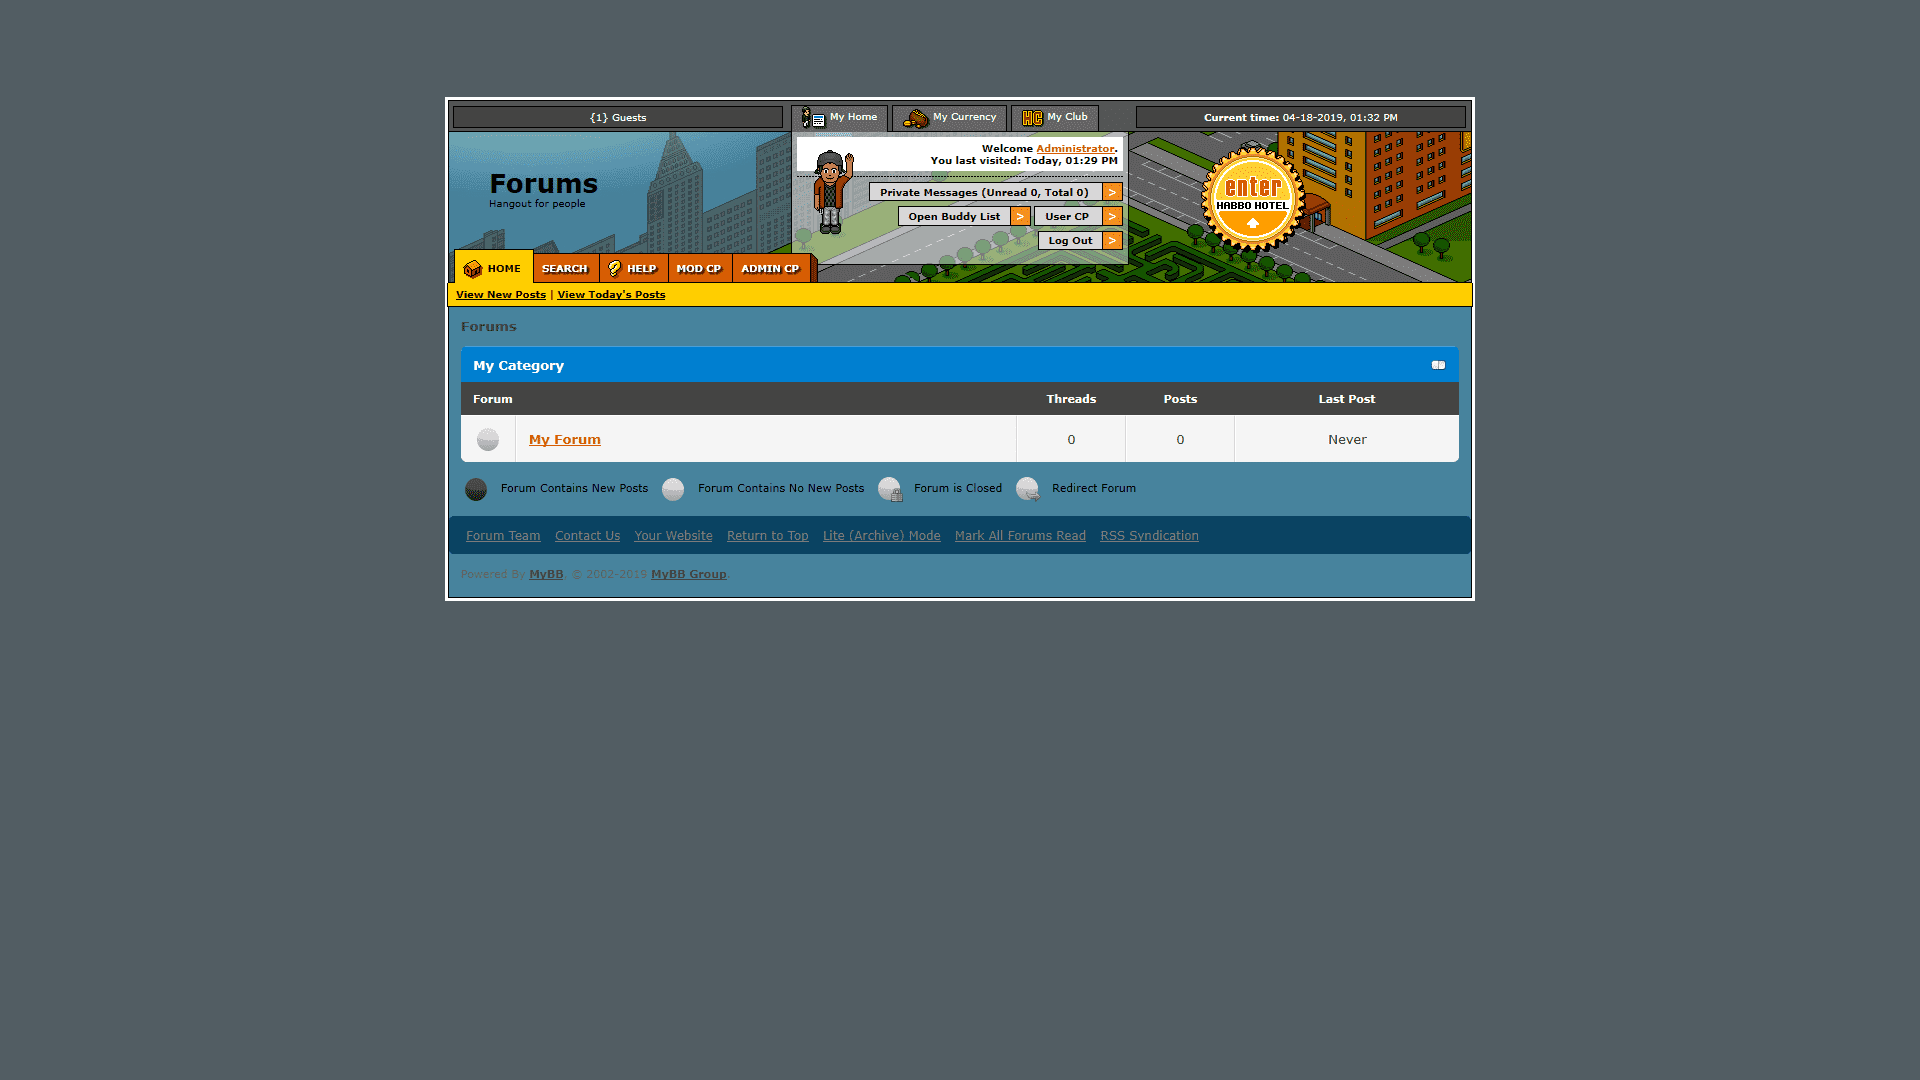 Cw5Ag0P - Remaster 2006 Habbo Layout [release][work-in-progress] - RaGEZONE Forums